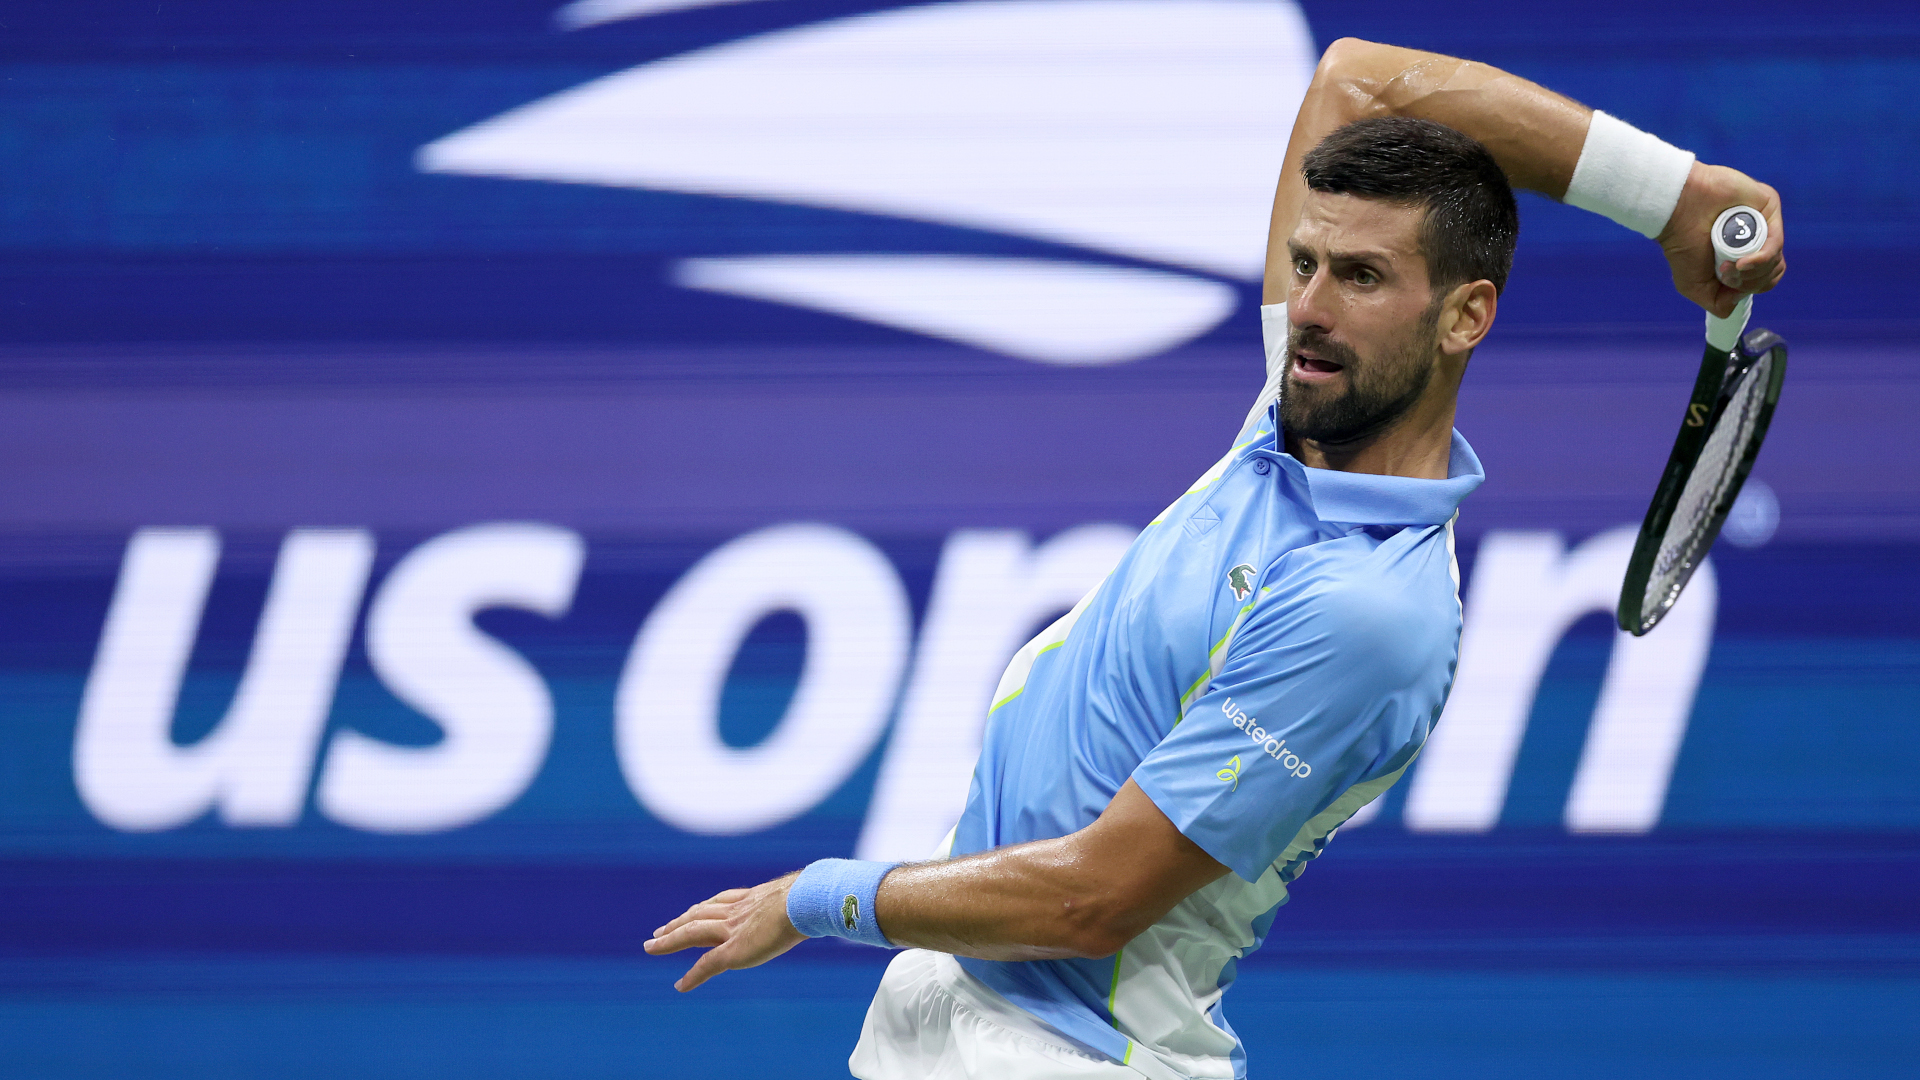 Djokovic vs Medvedev live stream How to watch US Open final for free